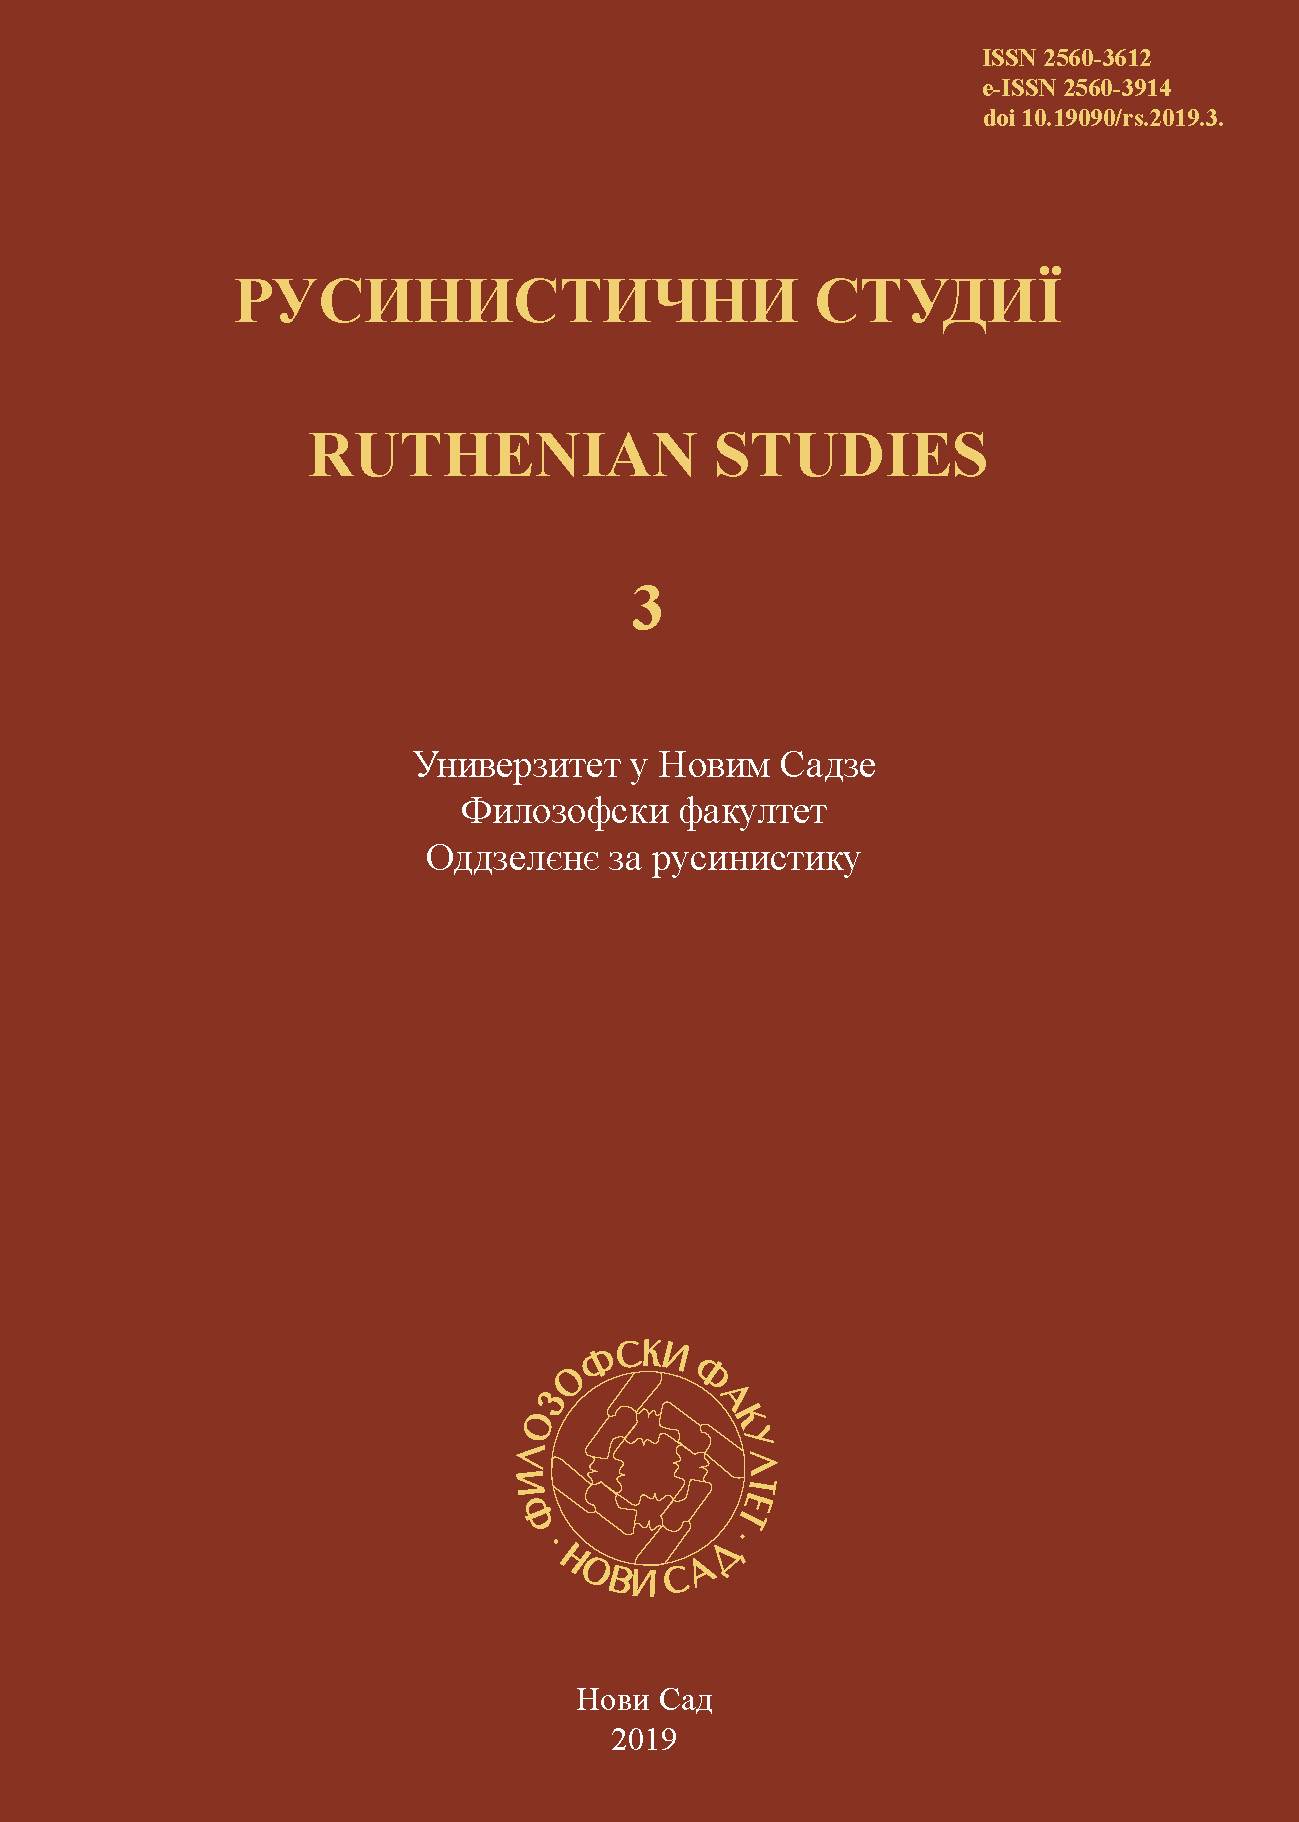 RELATIONS BETWEEN UKRANIANS AND SERBIANS THROUGHOUT HISTORY: CONTACTS, TOPOLOGY AND STYLISTICS Cover Image